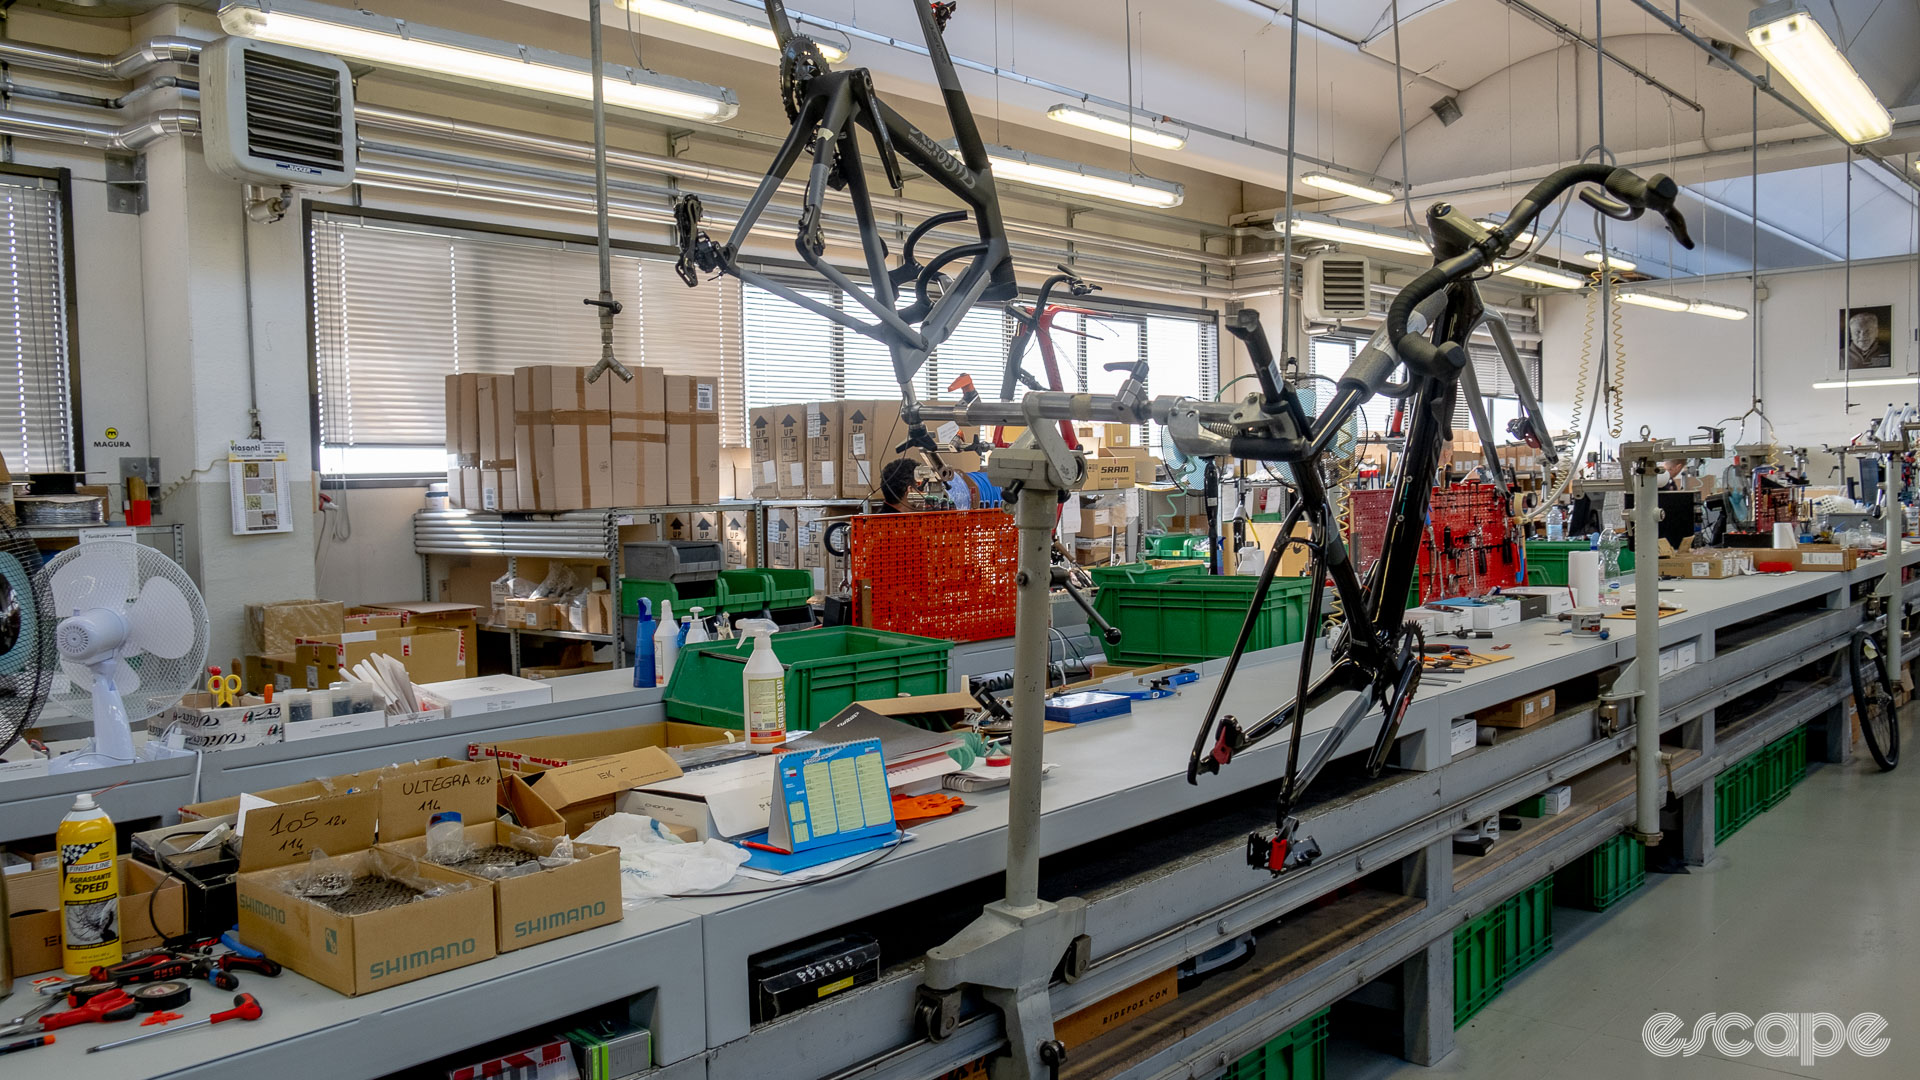 The photo shows two bikes on bike stands on Wilier's assembly line. One bike is held upside down.